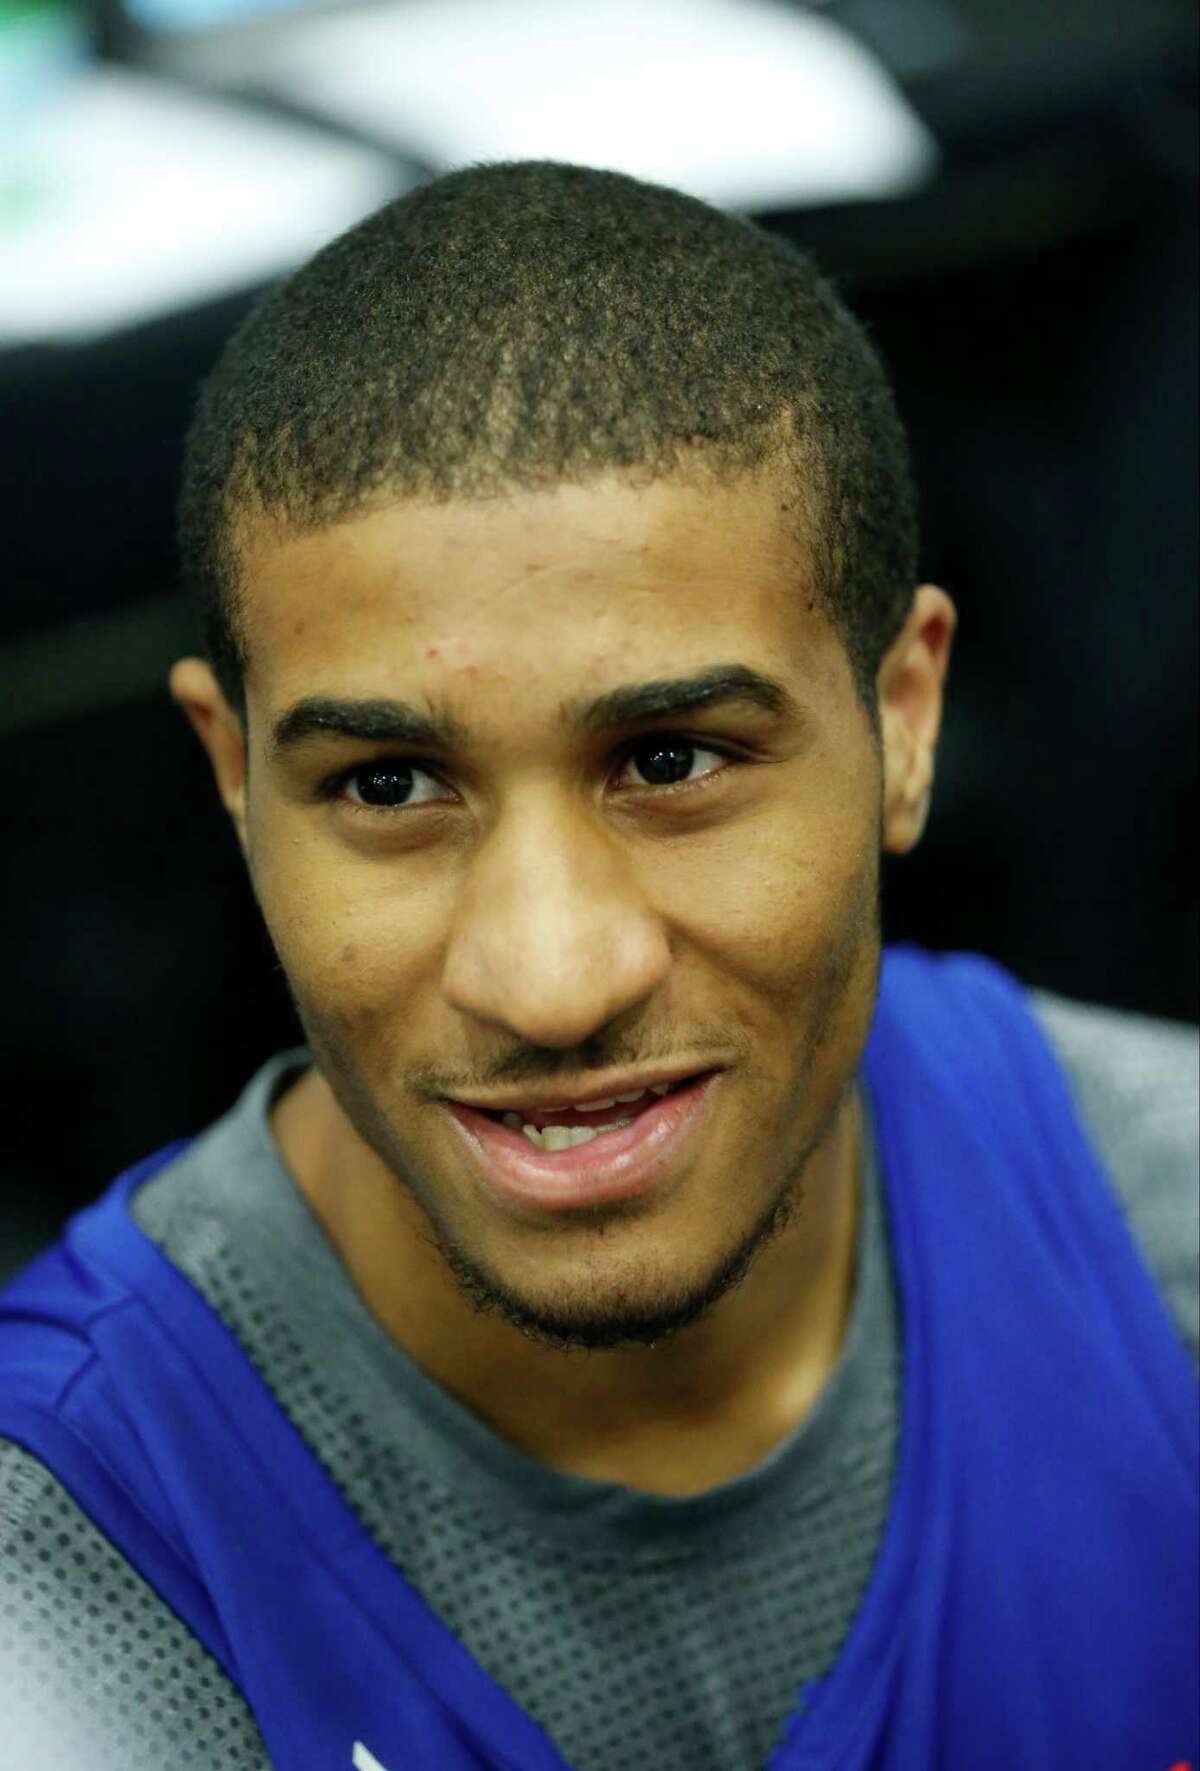 Gary Payton II Expected to Commit Soon - Sonics Rising